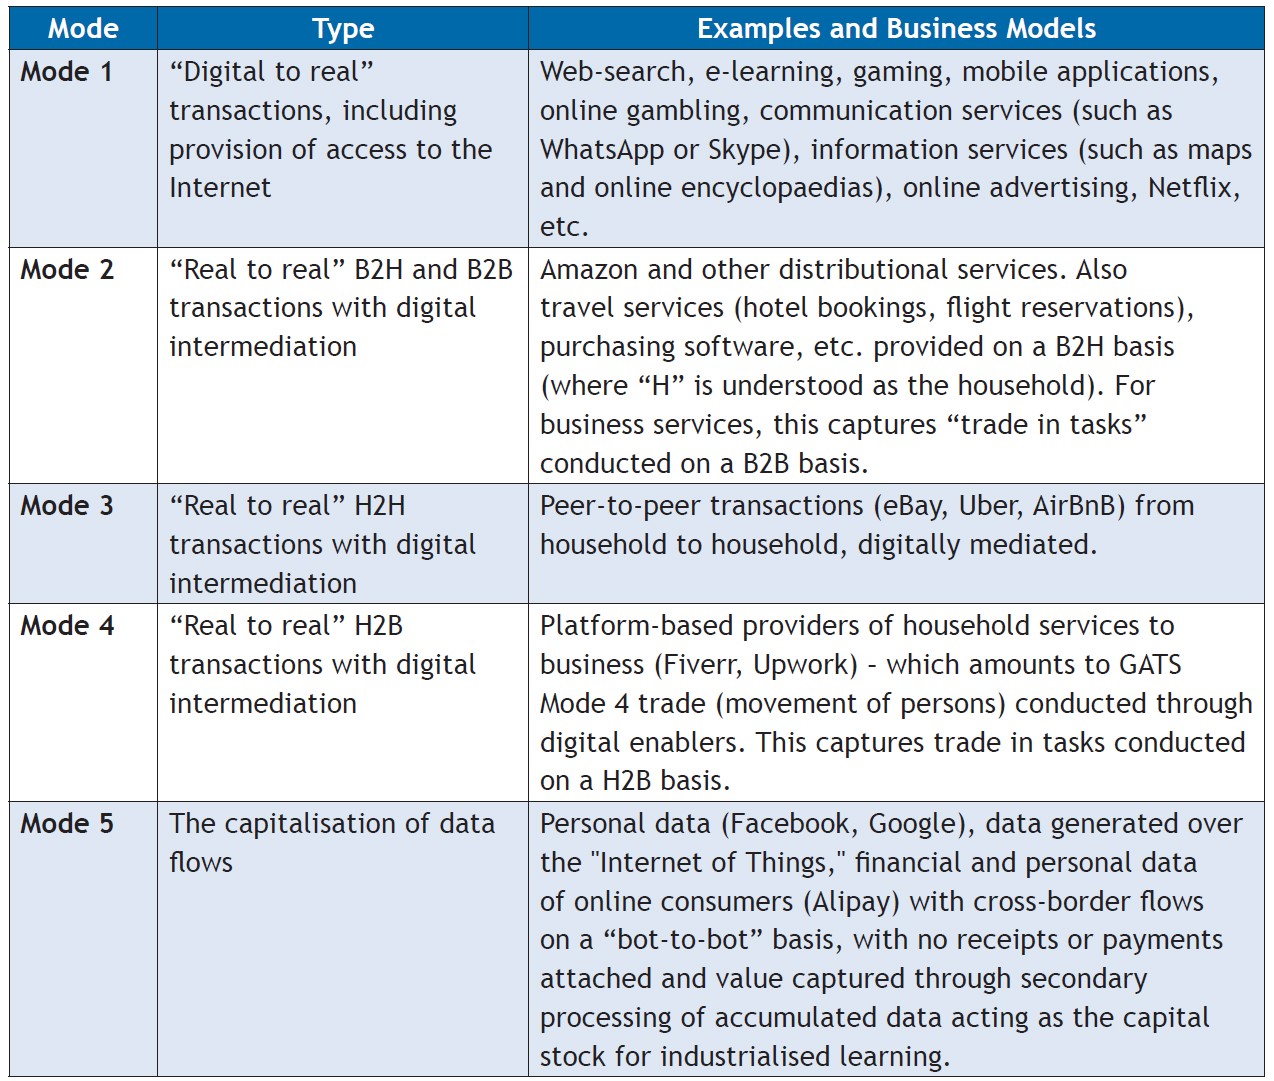  Modes of digital and digitally-enabled trade